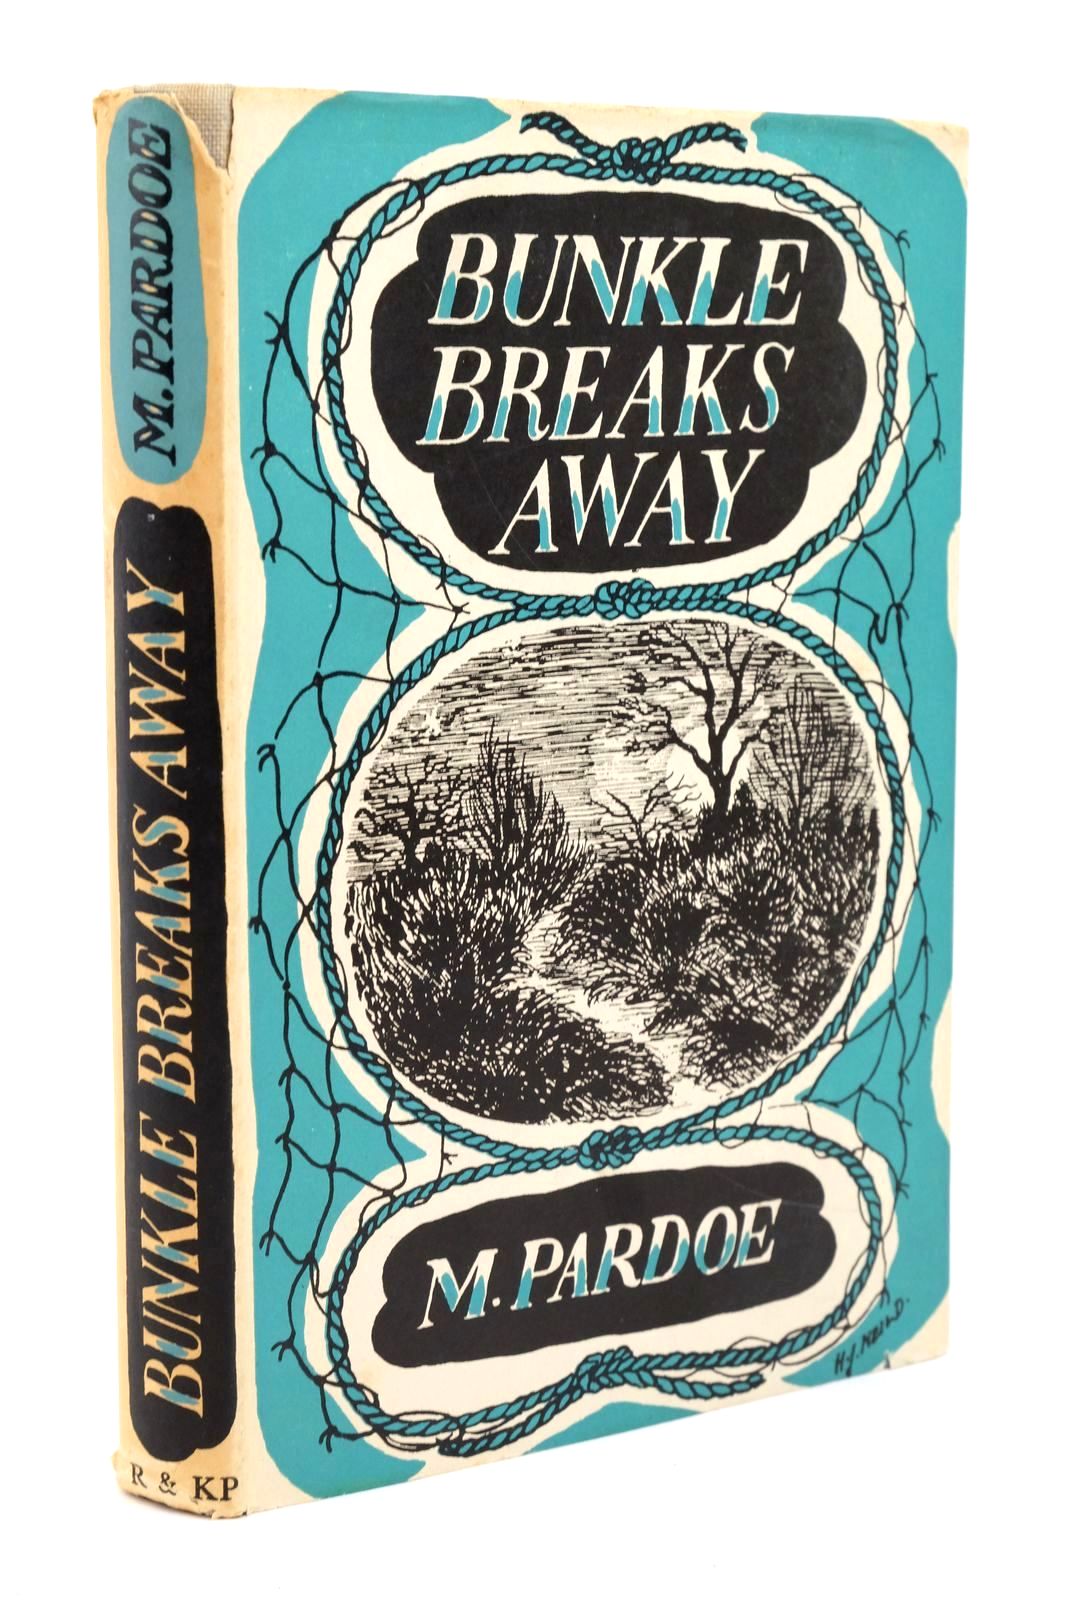 Photo of BUNKLE BREAKS AWAY written by Pardoe, M. illustrated by Neild, Julie published by Routledge &amp; Kegan Paul Ltd (STOCK CODE: 1322964)  for sale by Stella & Rose's Books